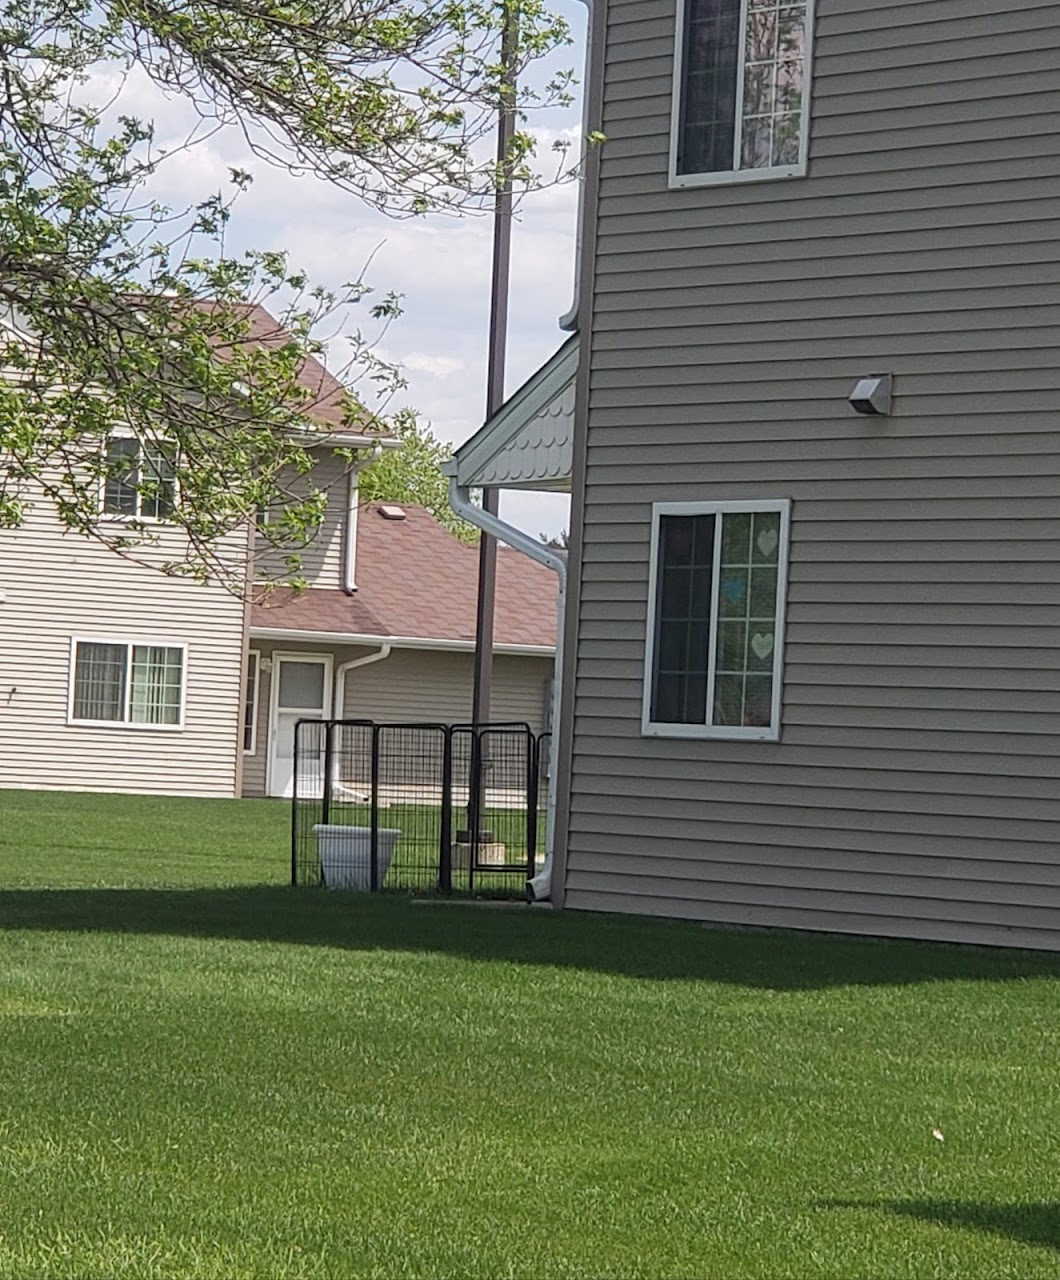 Photo of SHERWOOD PARK TOWNHOMES. Affordable housing located at MULTIPLE BUILDING ADDRESSES THIEF RIVER FALLS, MN 56701